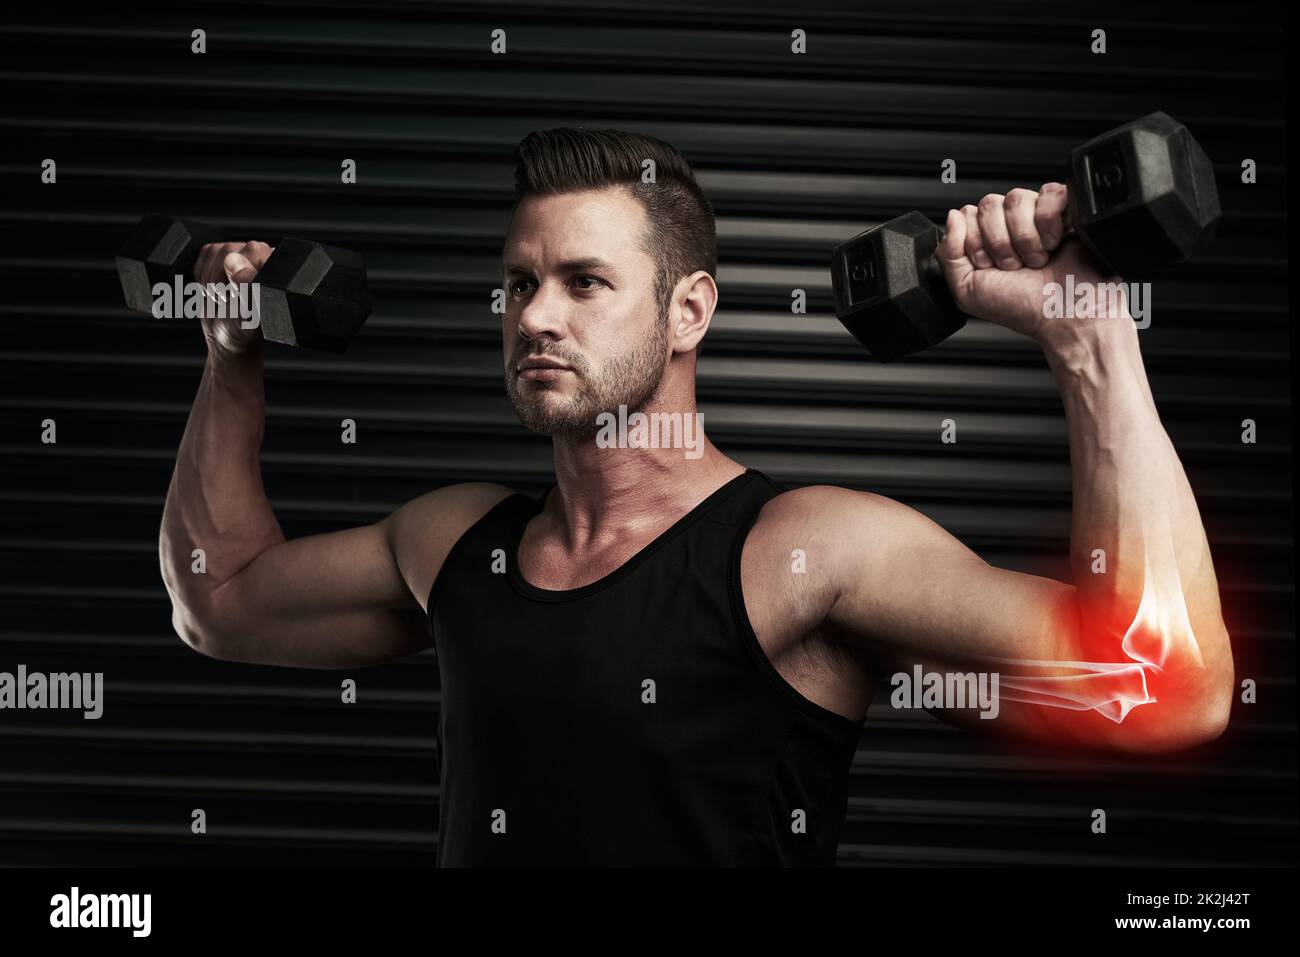 Raising his fitness levels. Studio shot of an athletic young man working out with dumbbells. Stock Photo